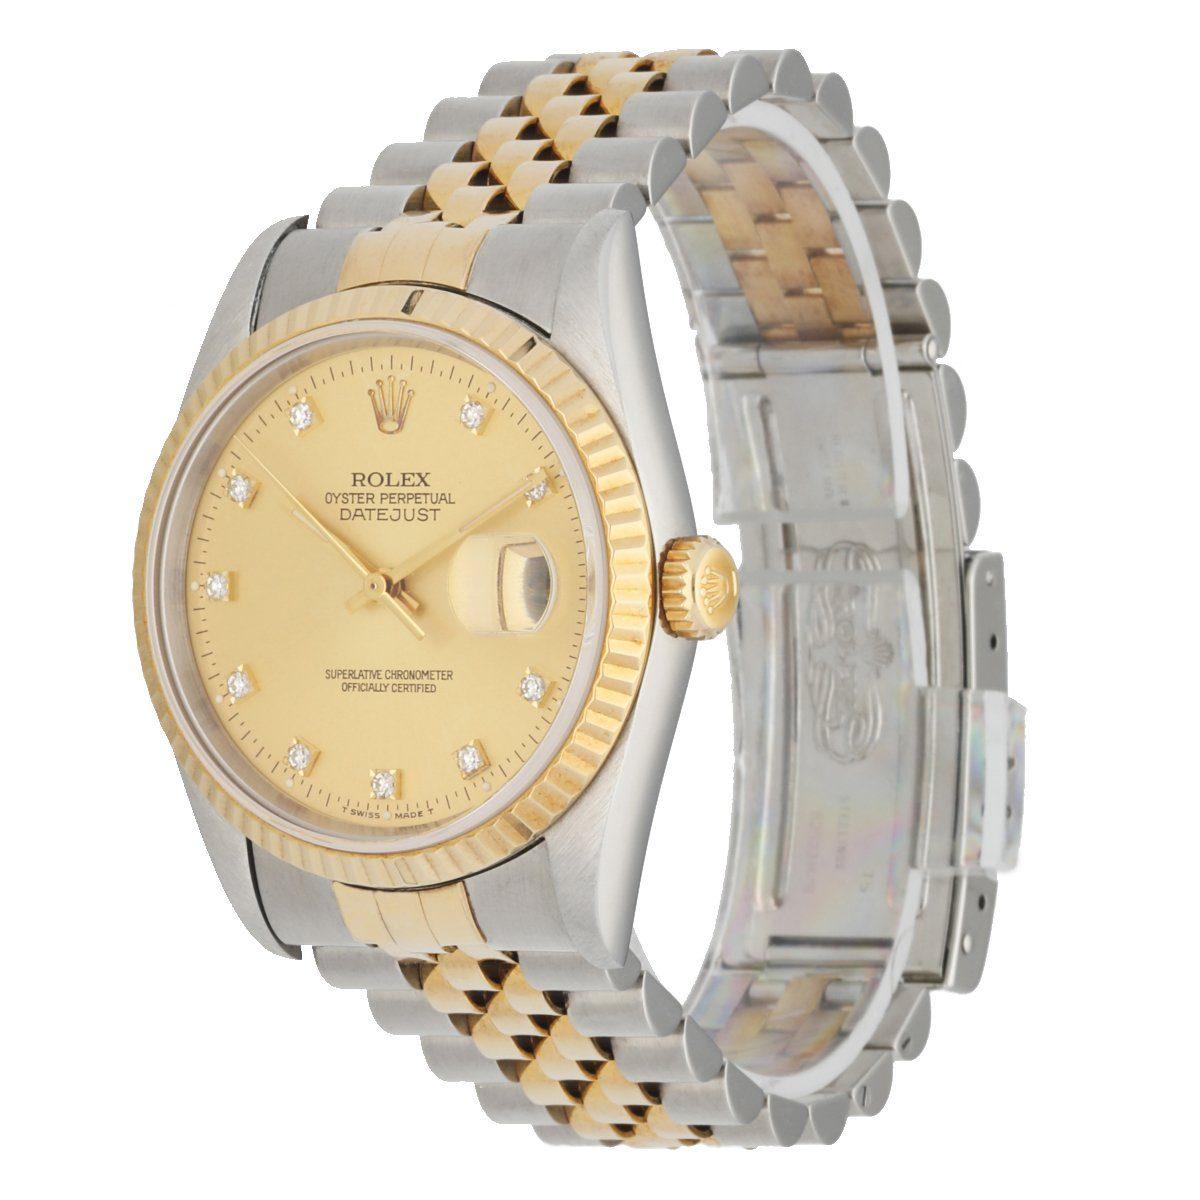 Rolex Datejust 16233 Men's Watch. 36mm Stainless Steel case.Â 18K Yellow GoldÂ fluted bezel. Champagne dial with gold hands and factory set diamond hour markers. Minute markers on the outer dial. Date display at the 3 o'clock position. Two Tone,